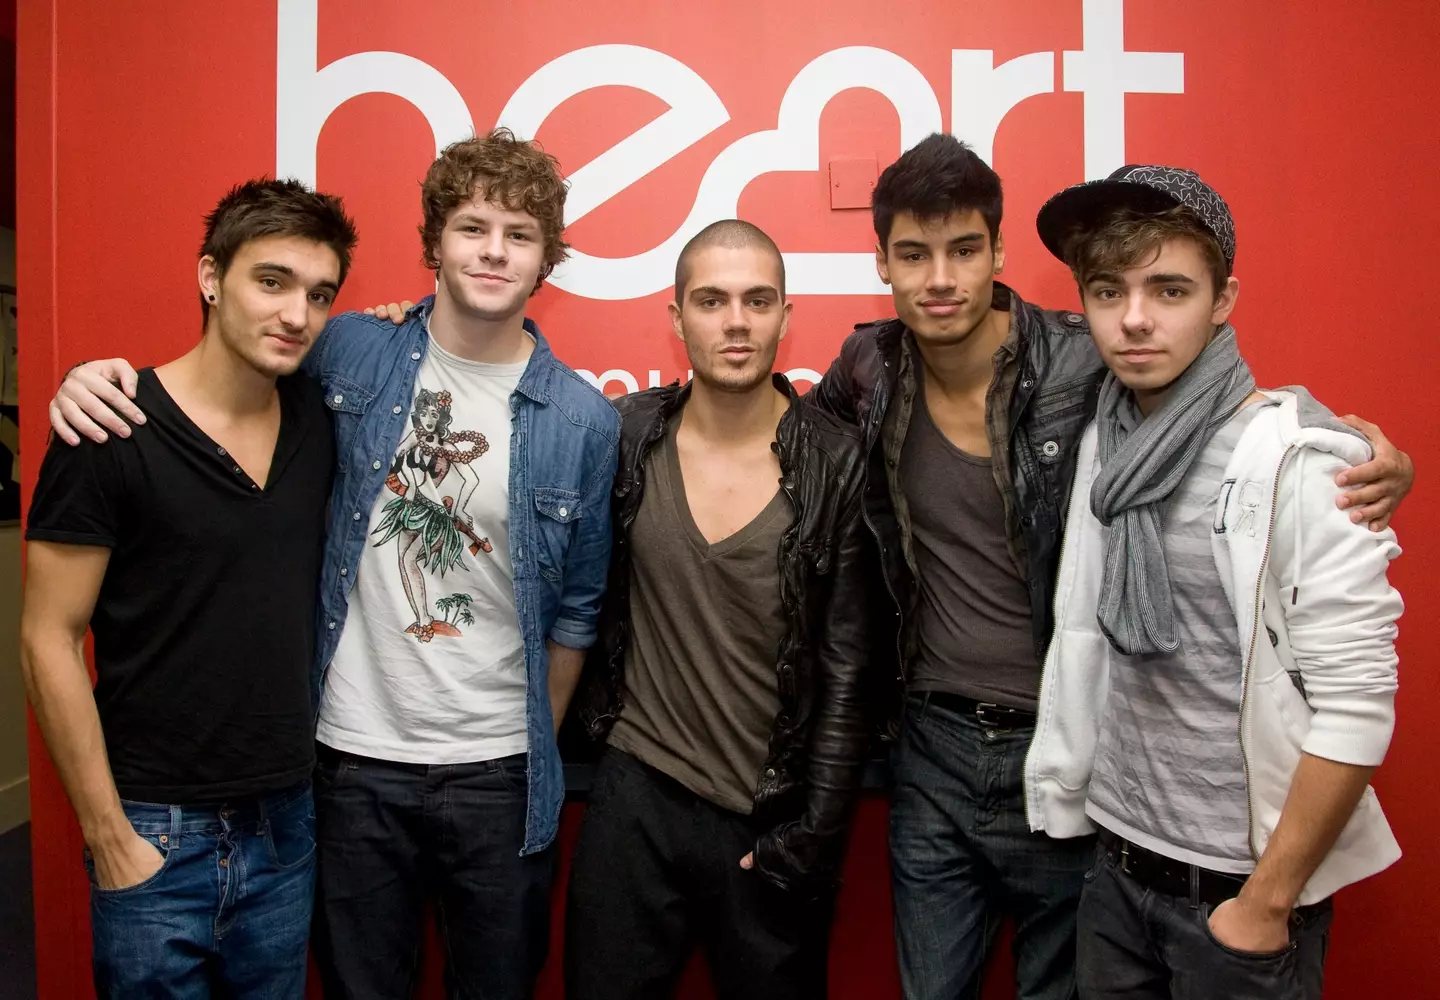 The Wanted are reuniting and we are here for it (